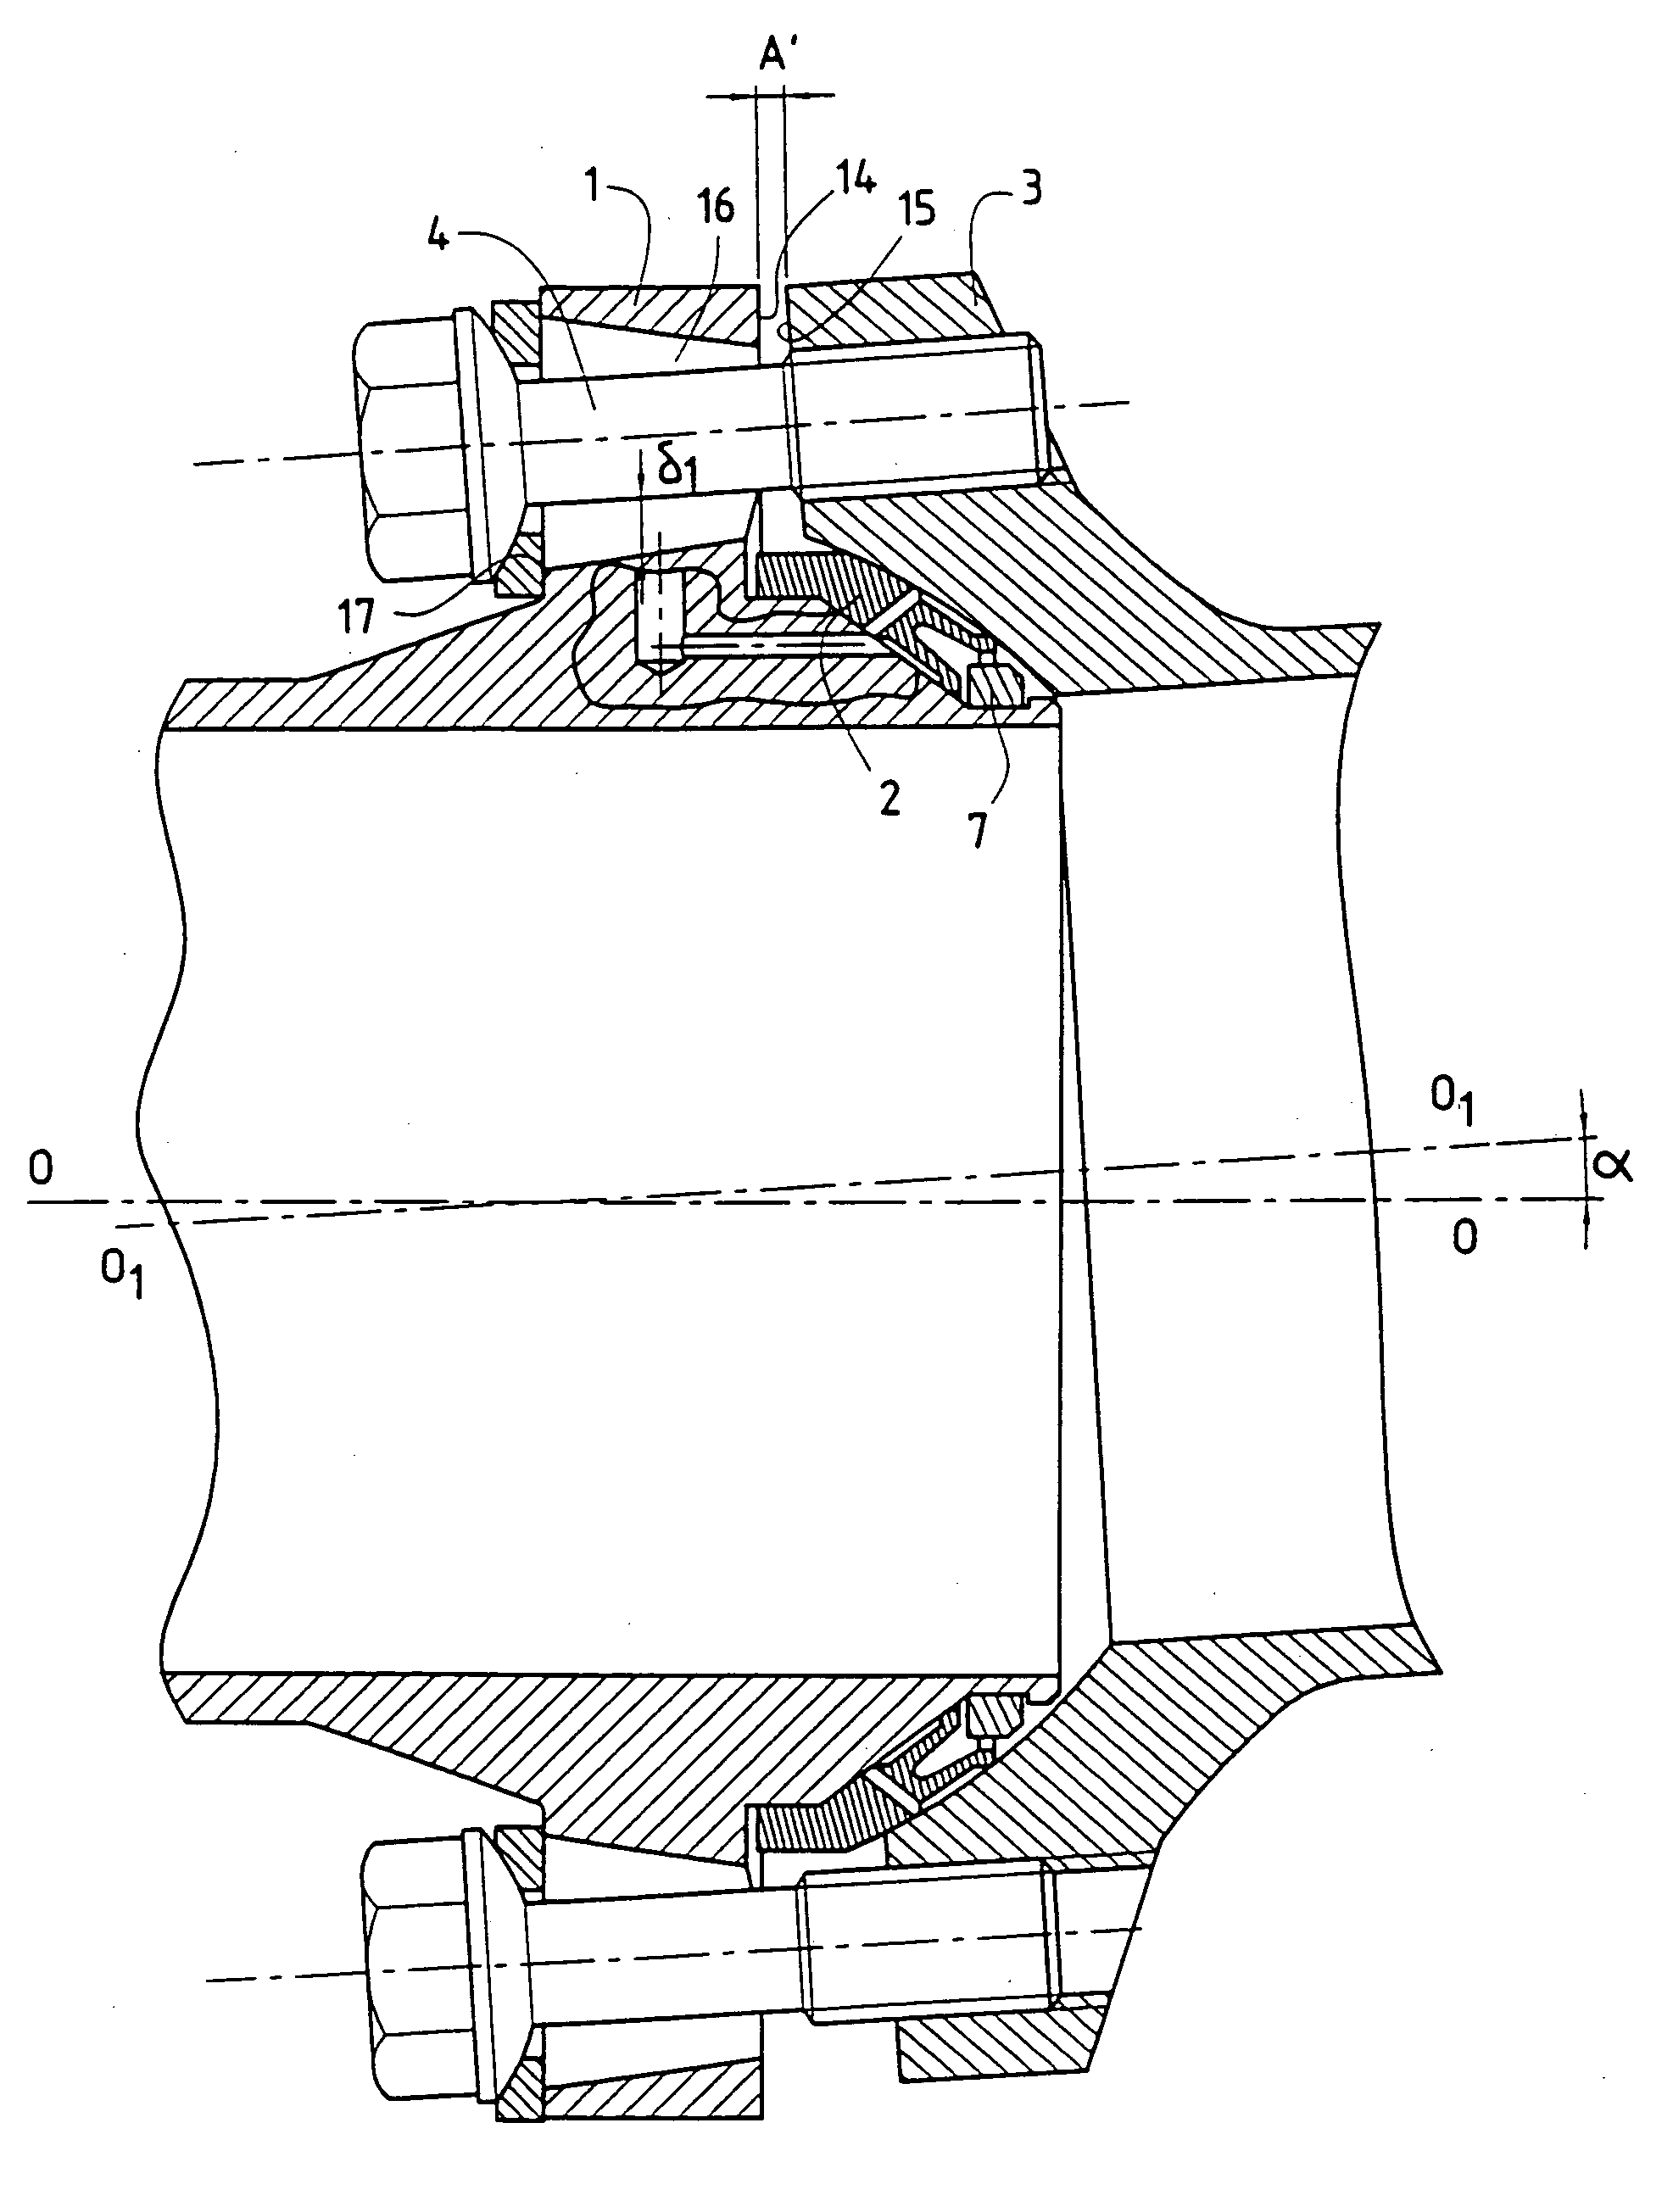 Flanged coupling device with a static ball-and-socket joint